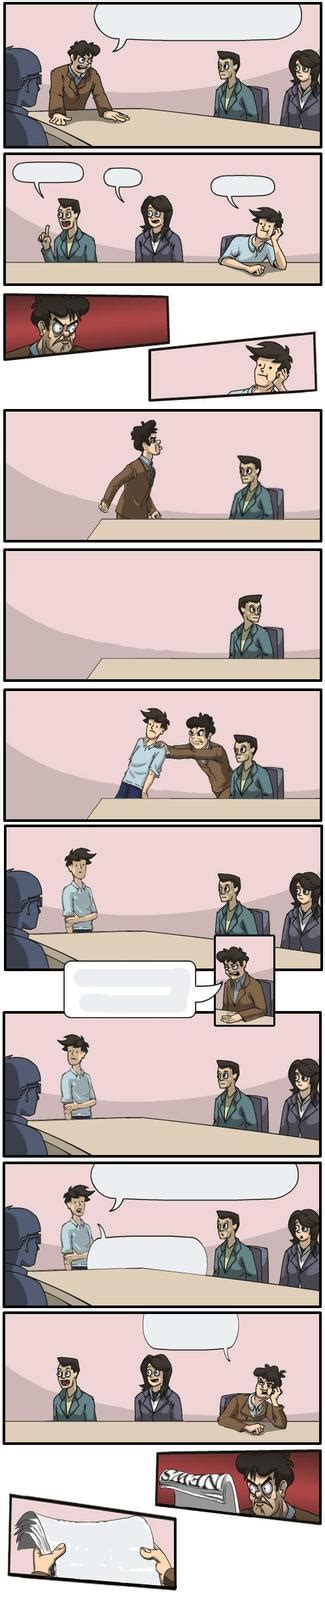 Boardroom Meeting Suggestion Extended Template Boardroom Suggestion